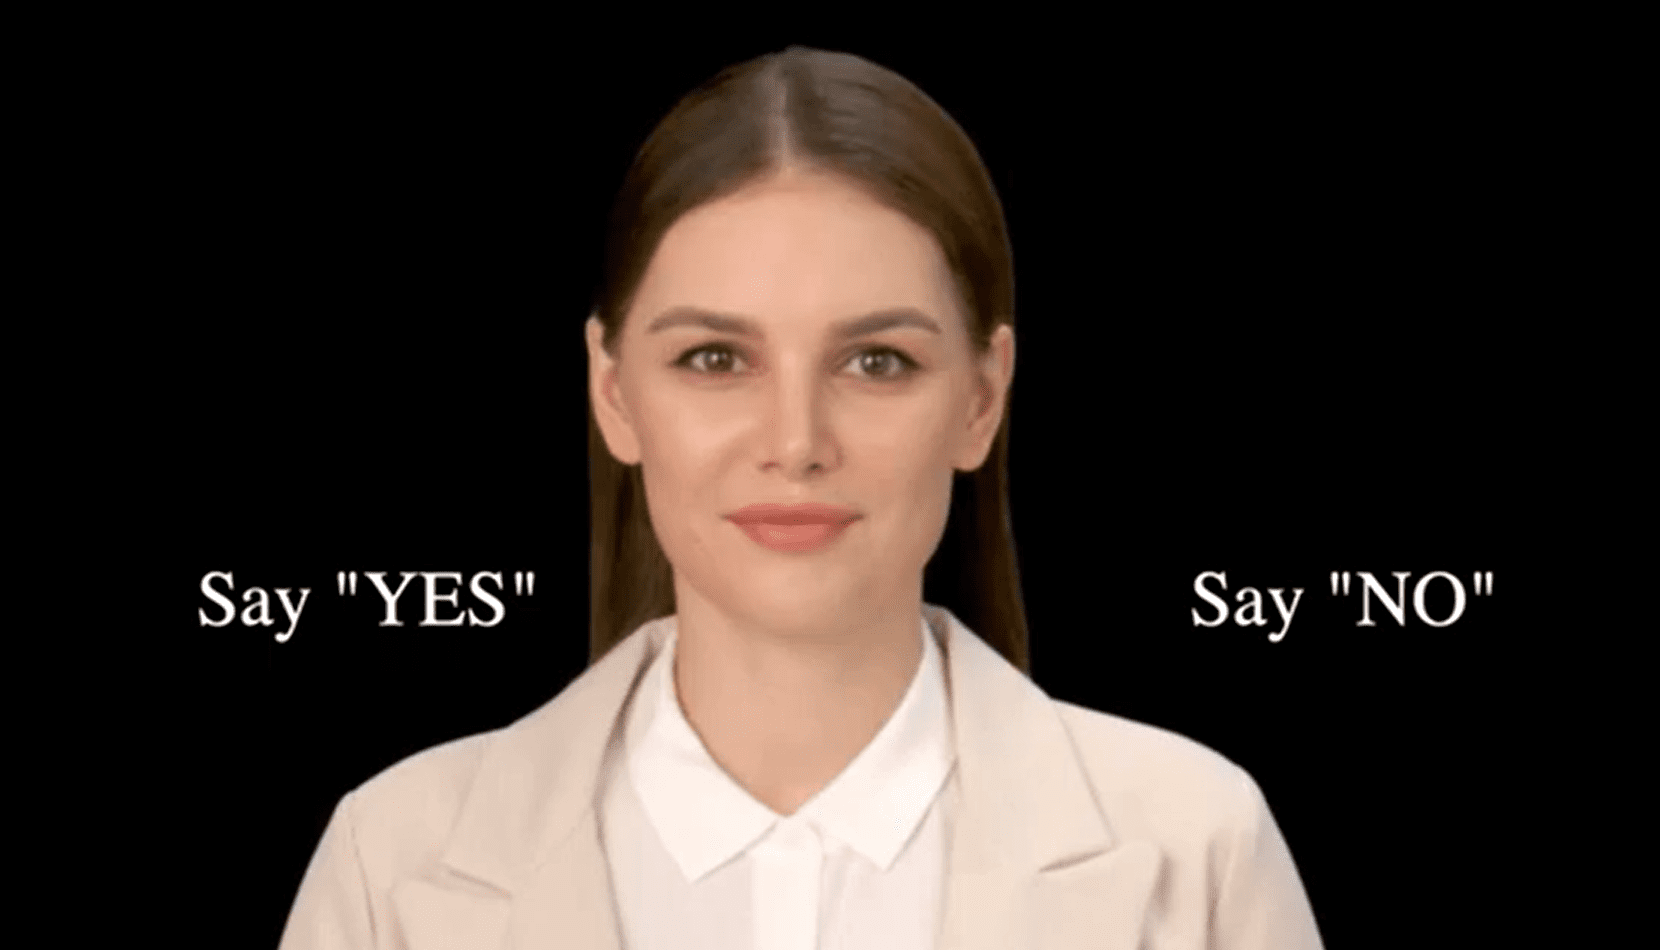 Pleasant looking woman with the words "Say Yes" and 'Say No" on either side of her